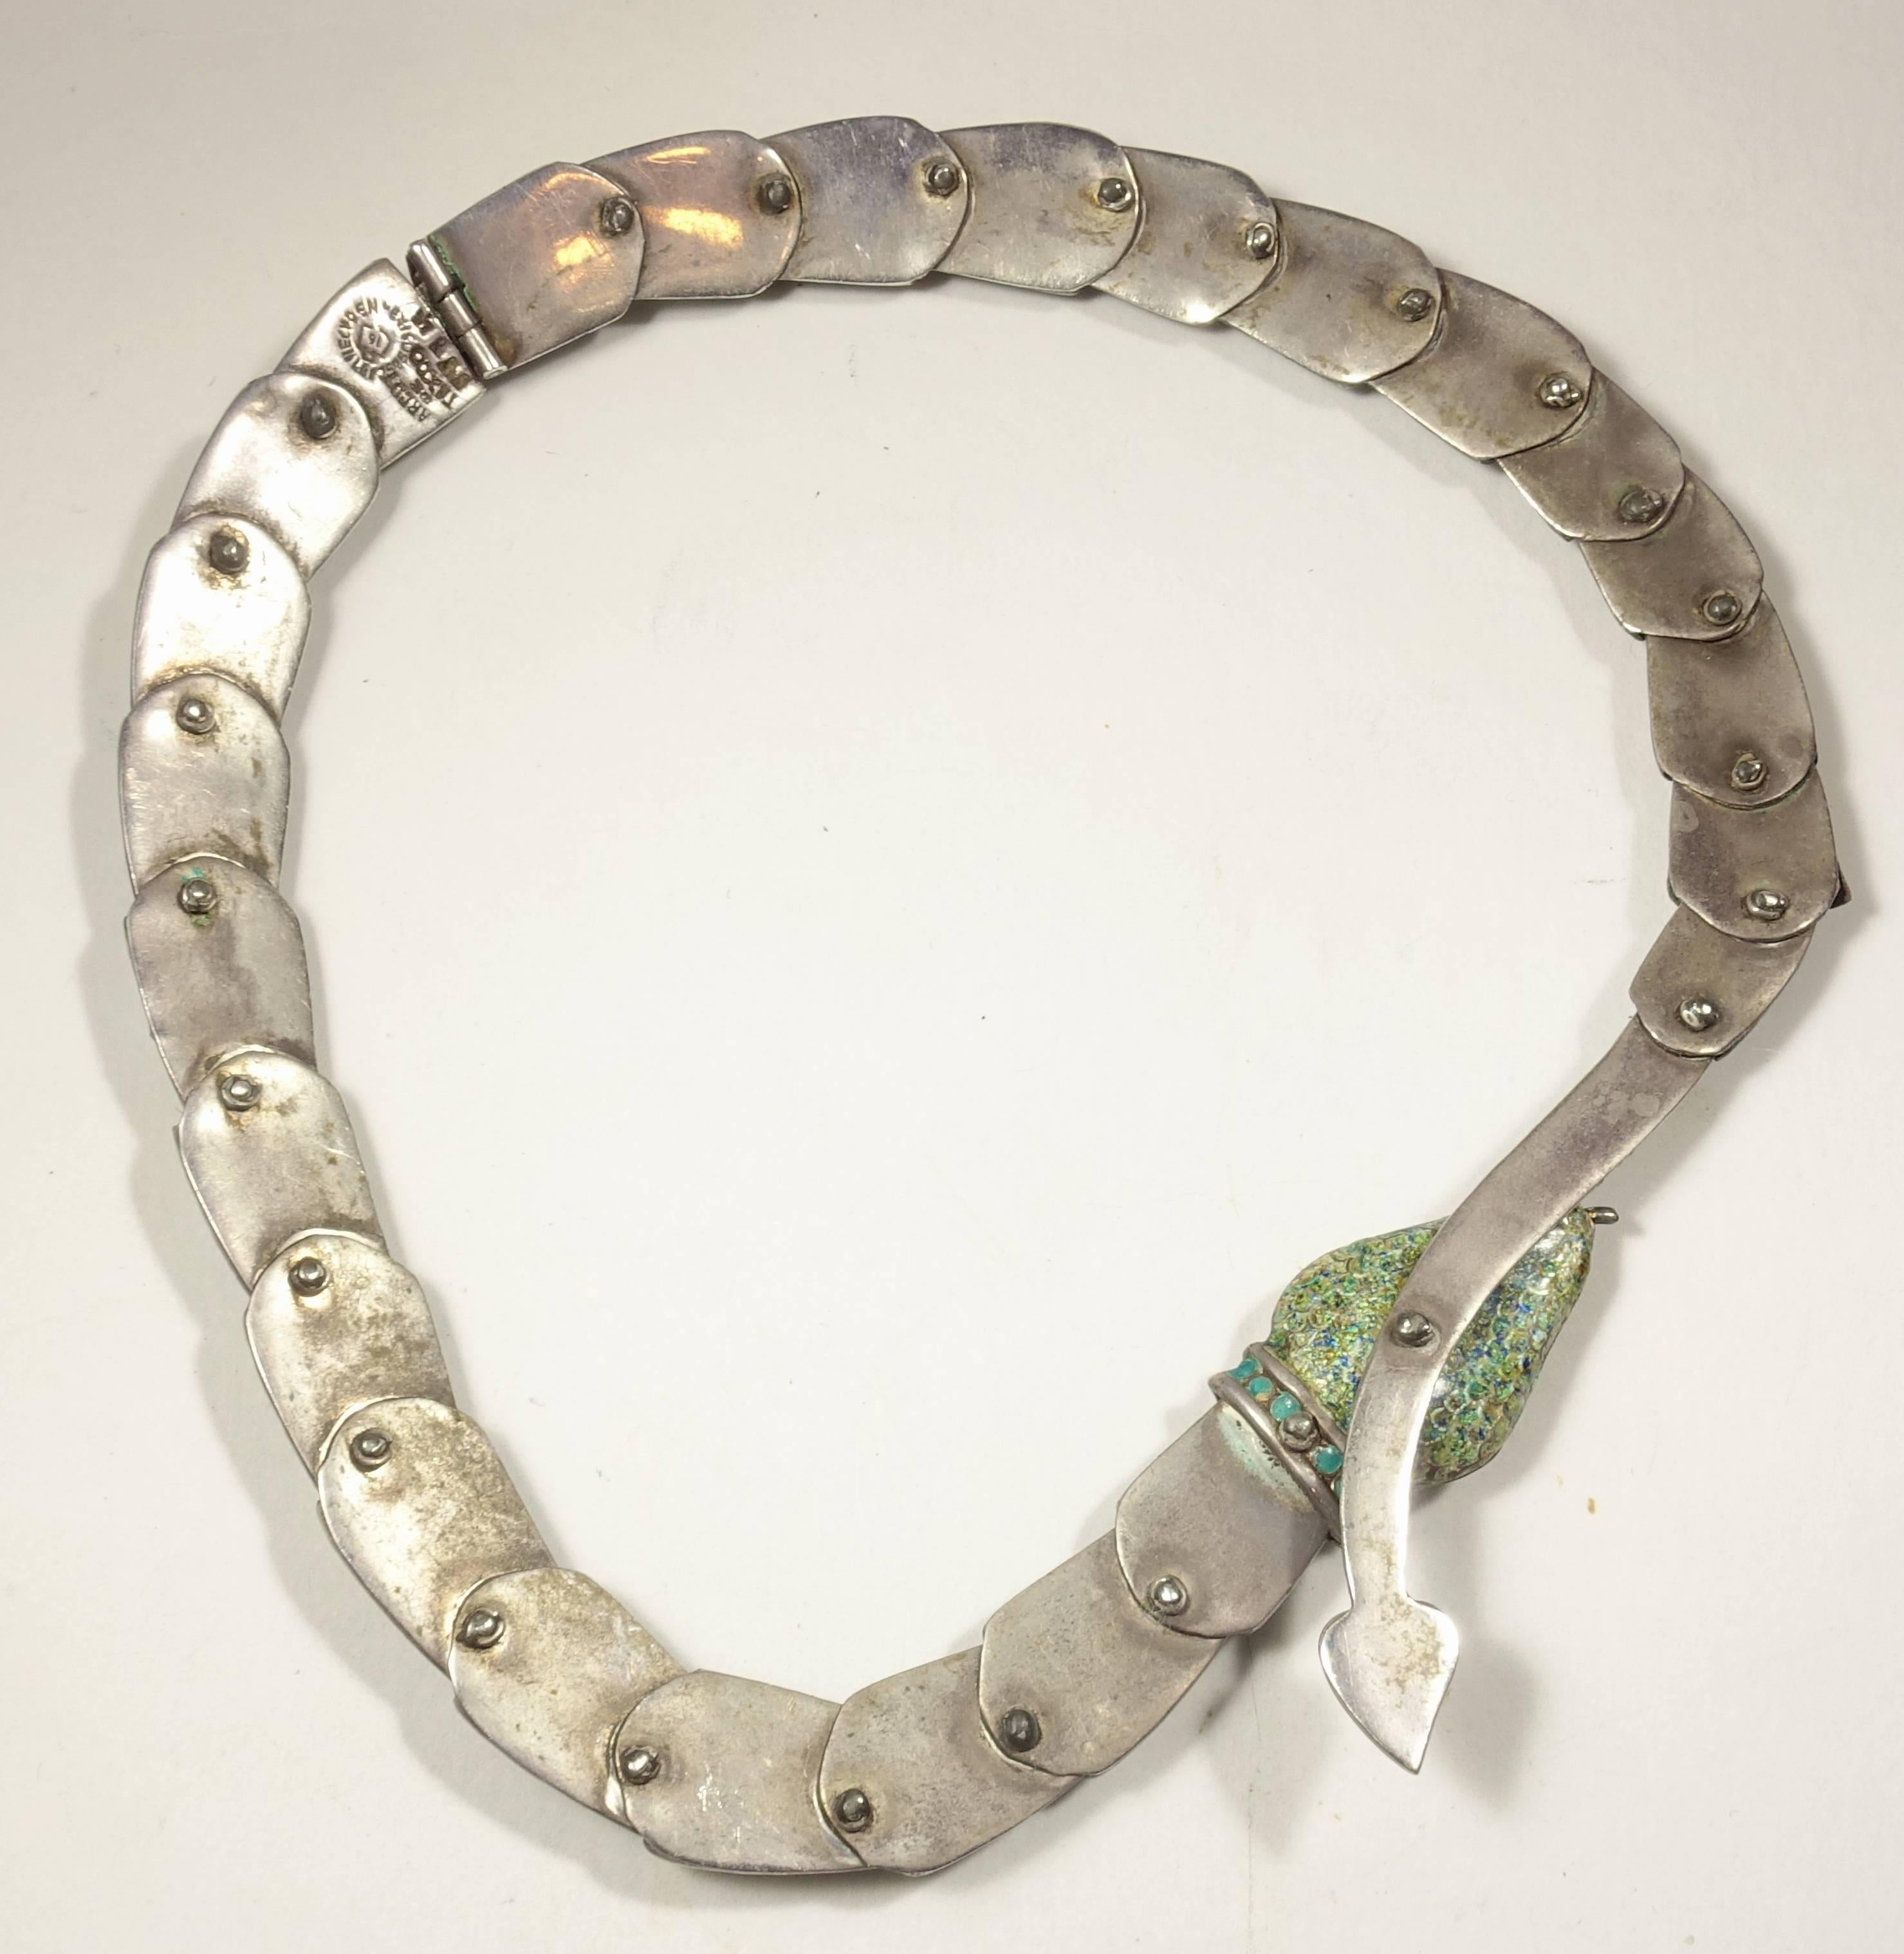 This has to be one of the most amazing vintage Margot necklaces I have ever seen.  It is made of sterling silver with green speckled enamel movable scales throughout its body.  Each scale is accentuated with a green stone. It has a slide in clasp. 